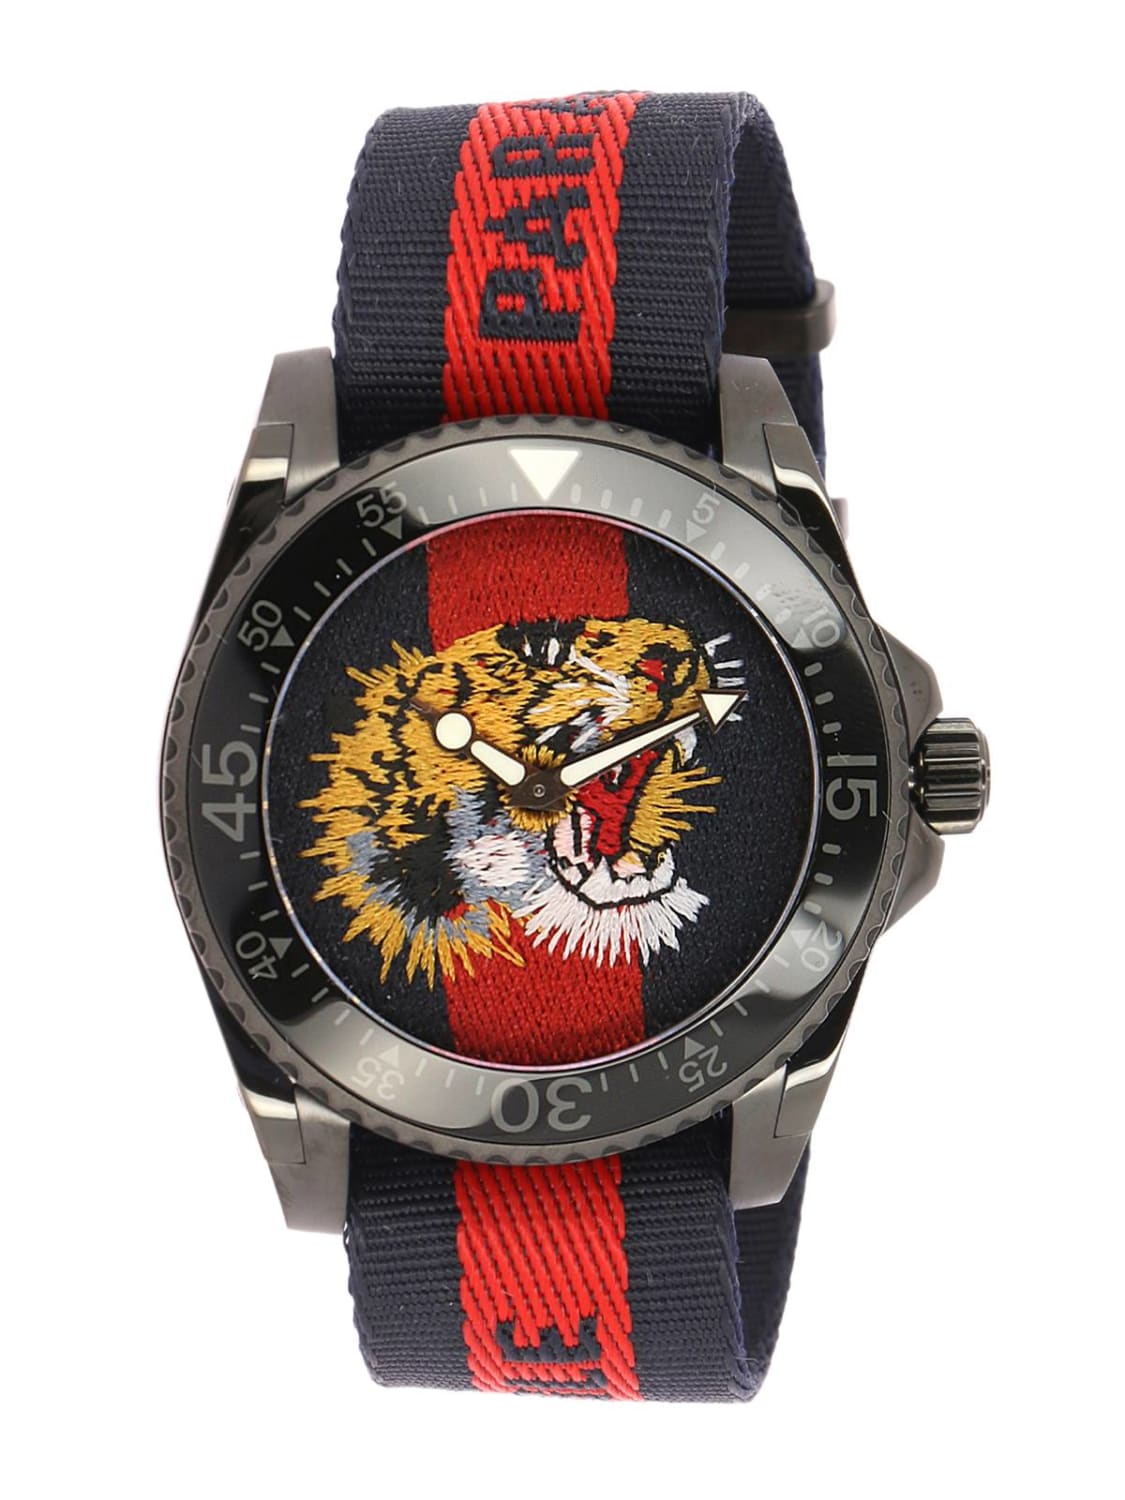 Watch Gucci: Le Marché des Merveilles watch 38mm case and Web Angry Cat pattern blue 2